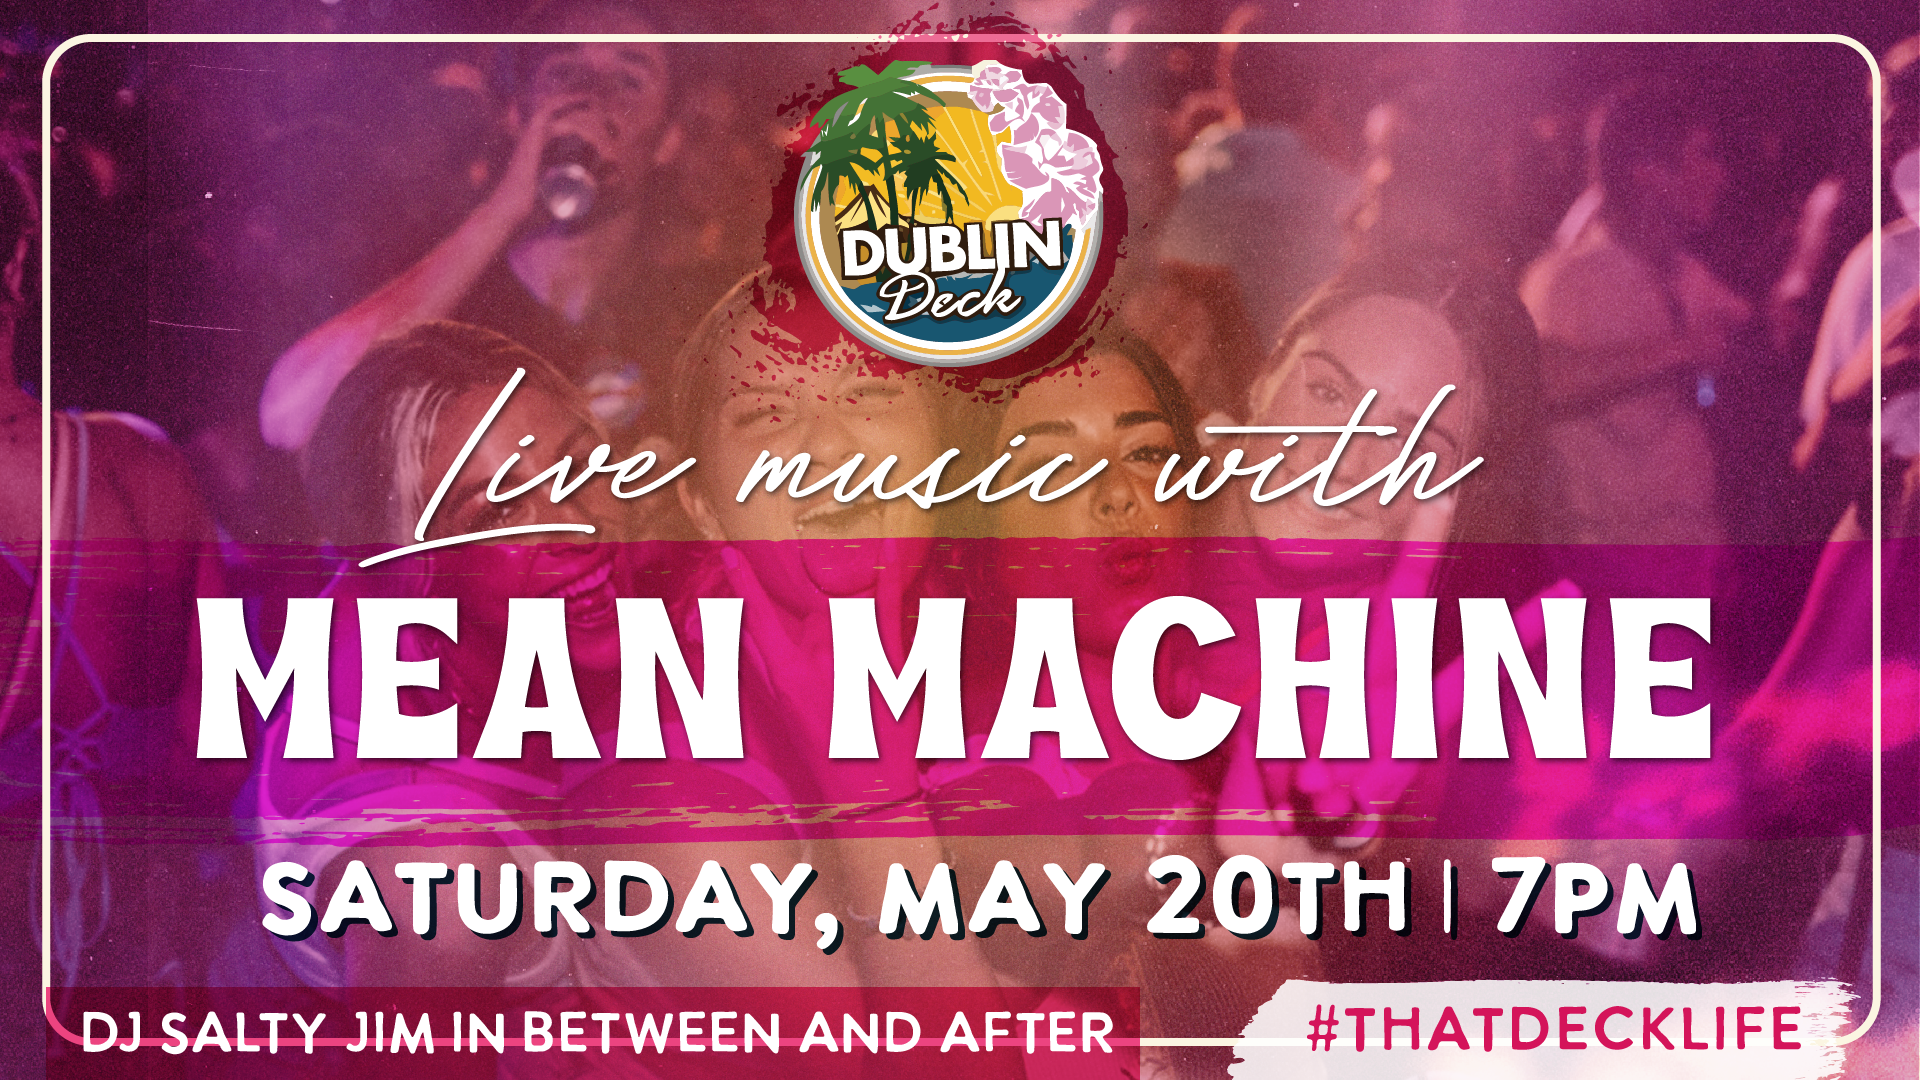 Spend your Saturday jammin' with Mean Machine! Music begins at 7PM